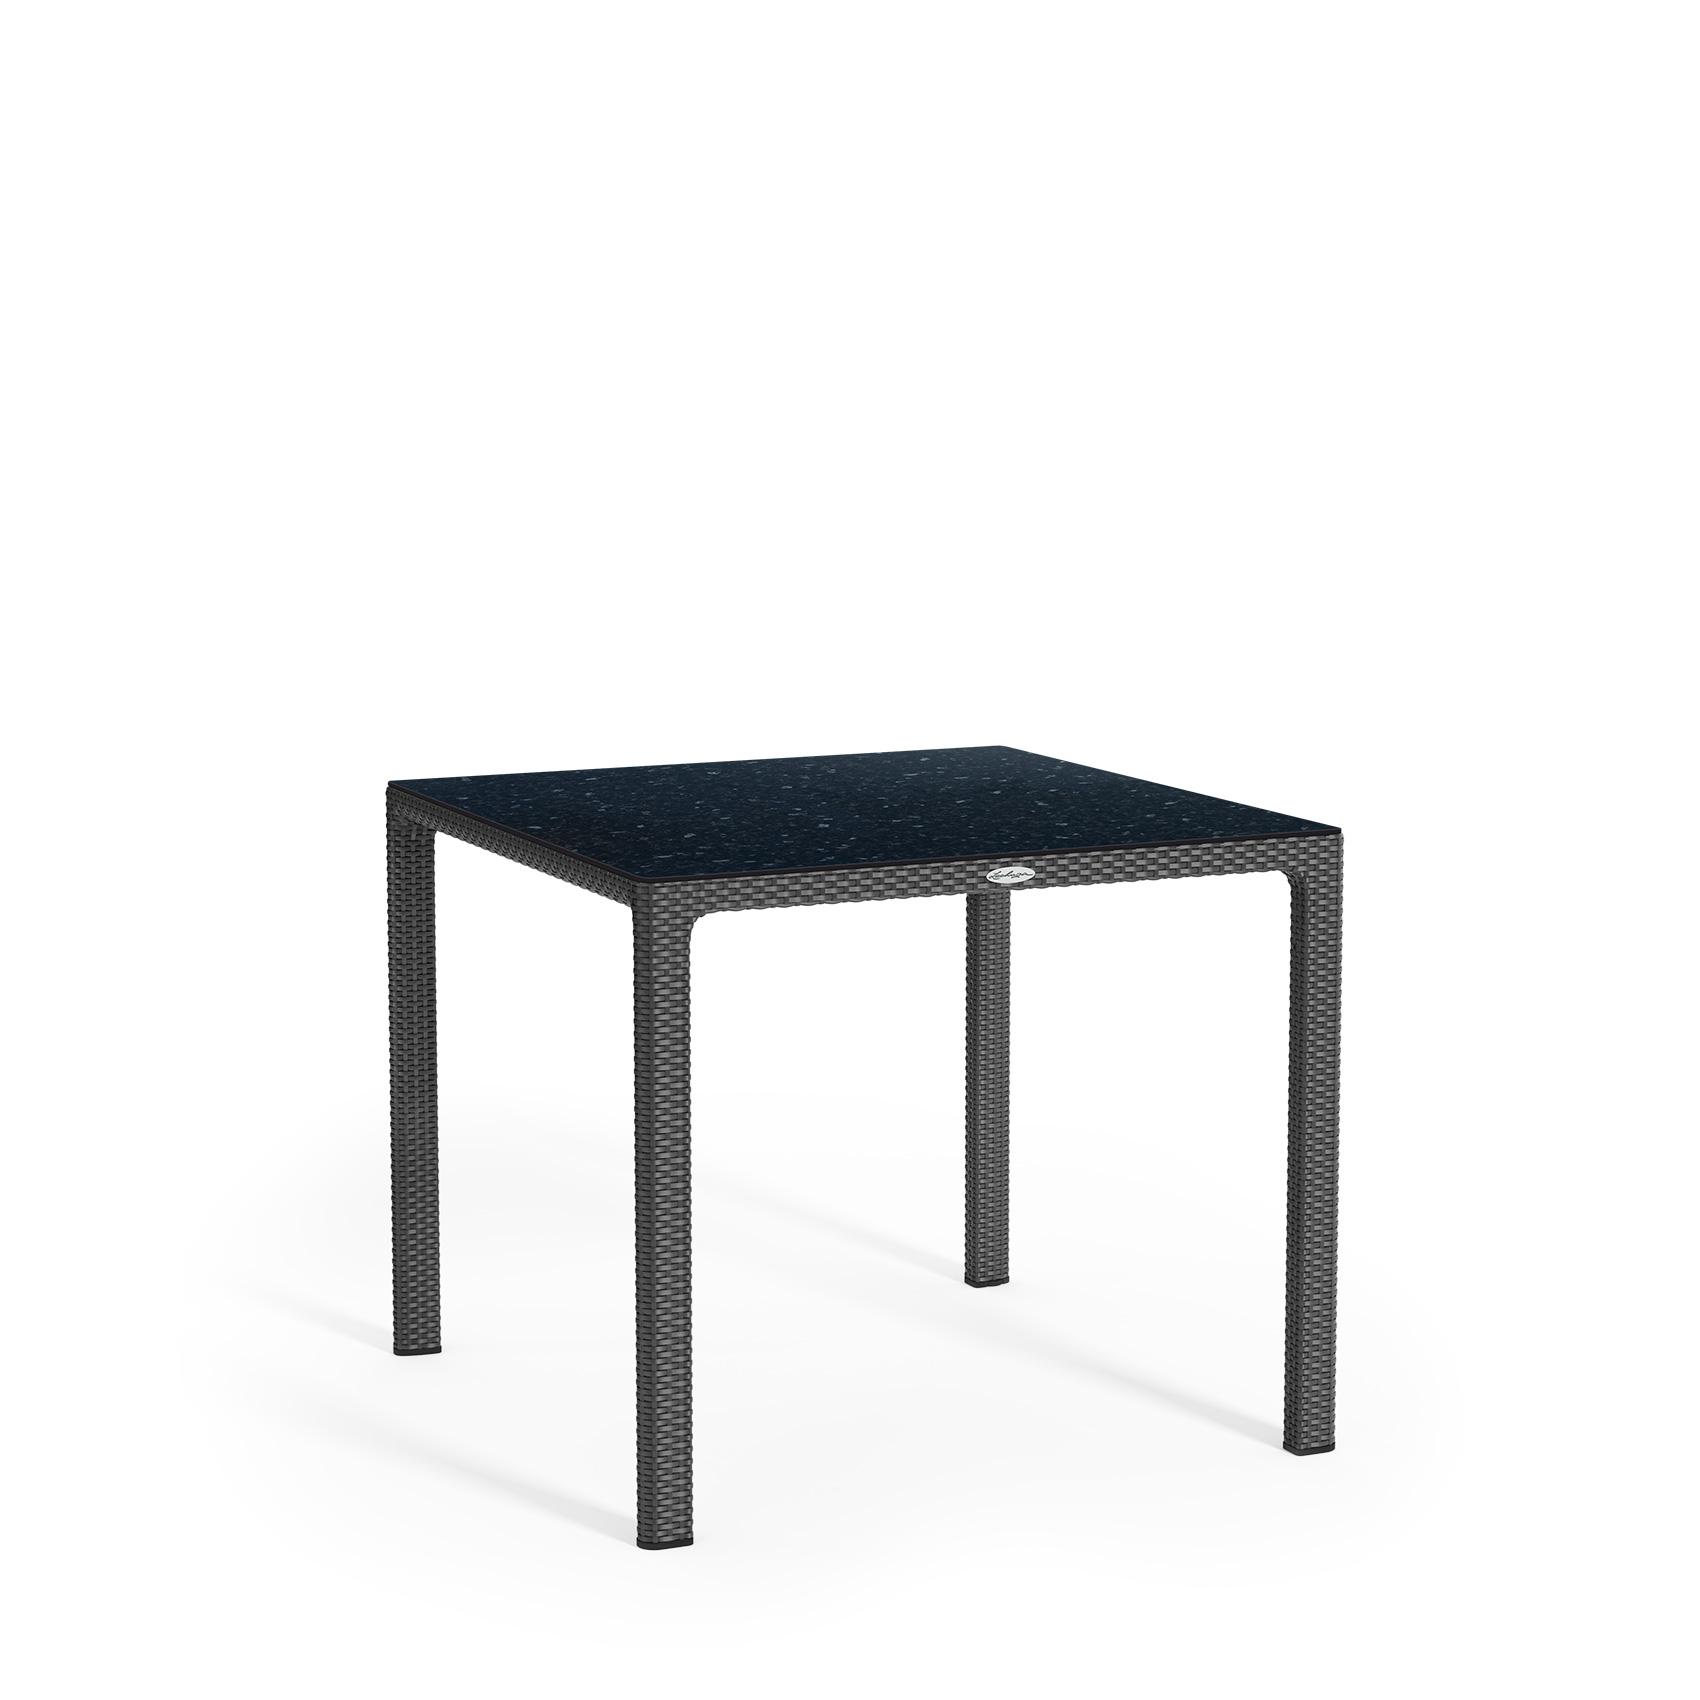 Small dining table with HPL tabletop